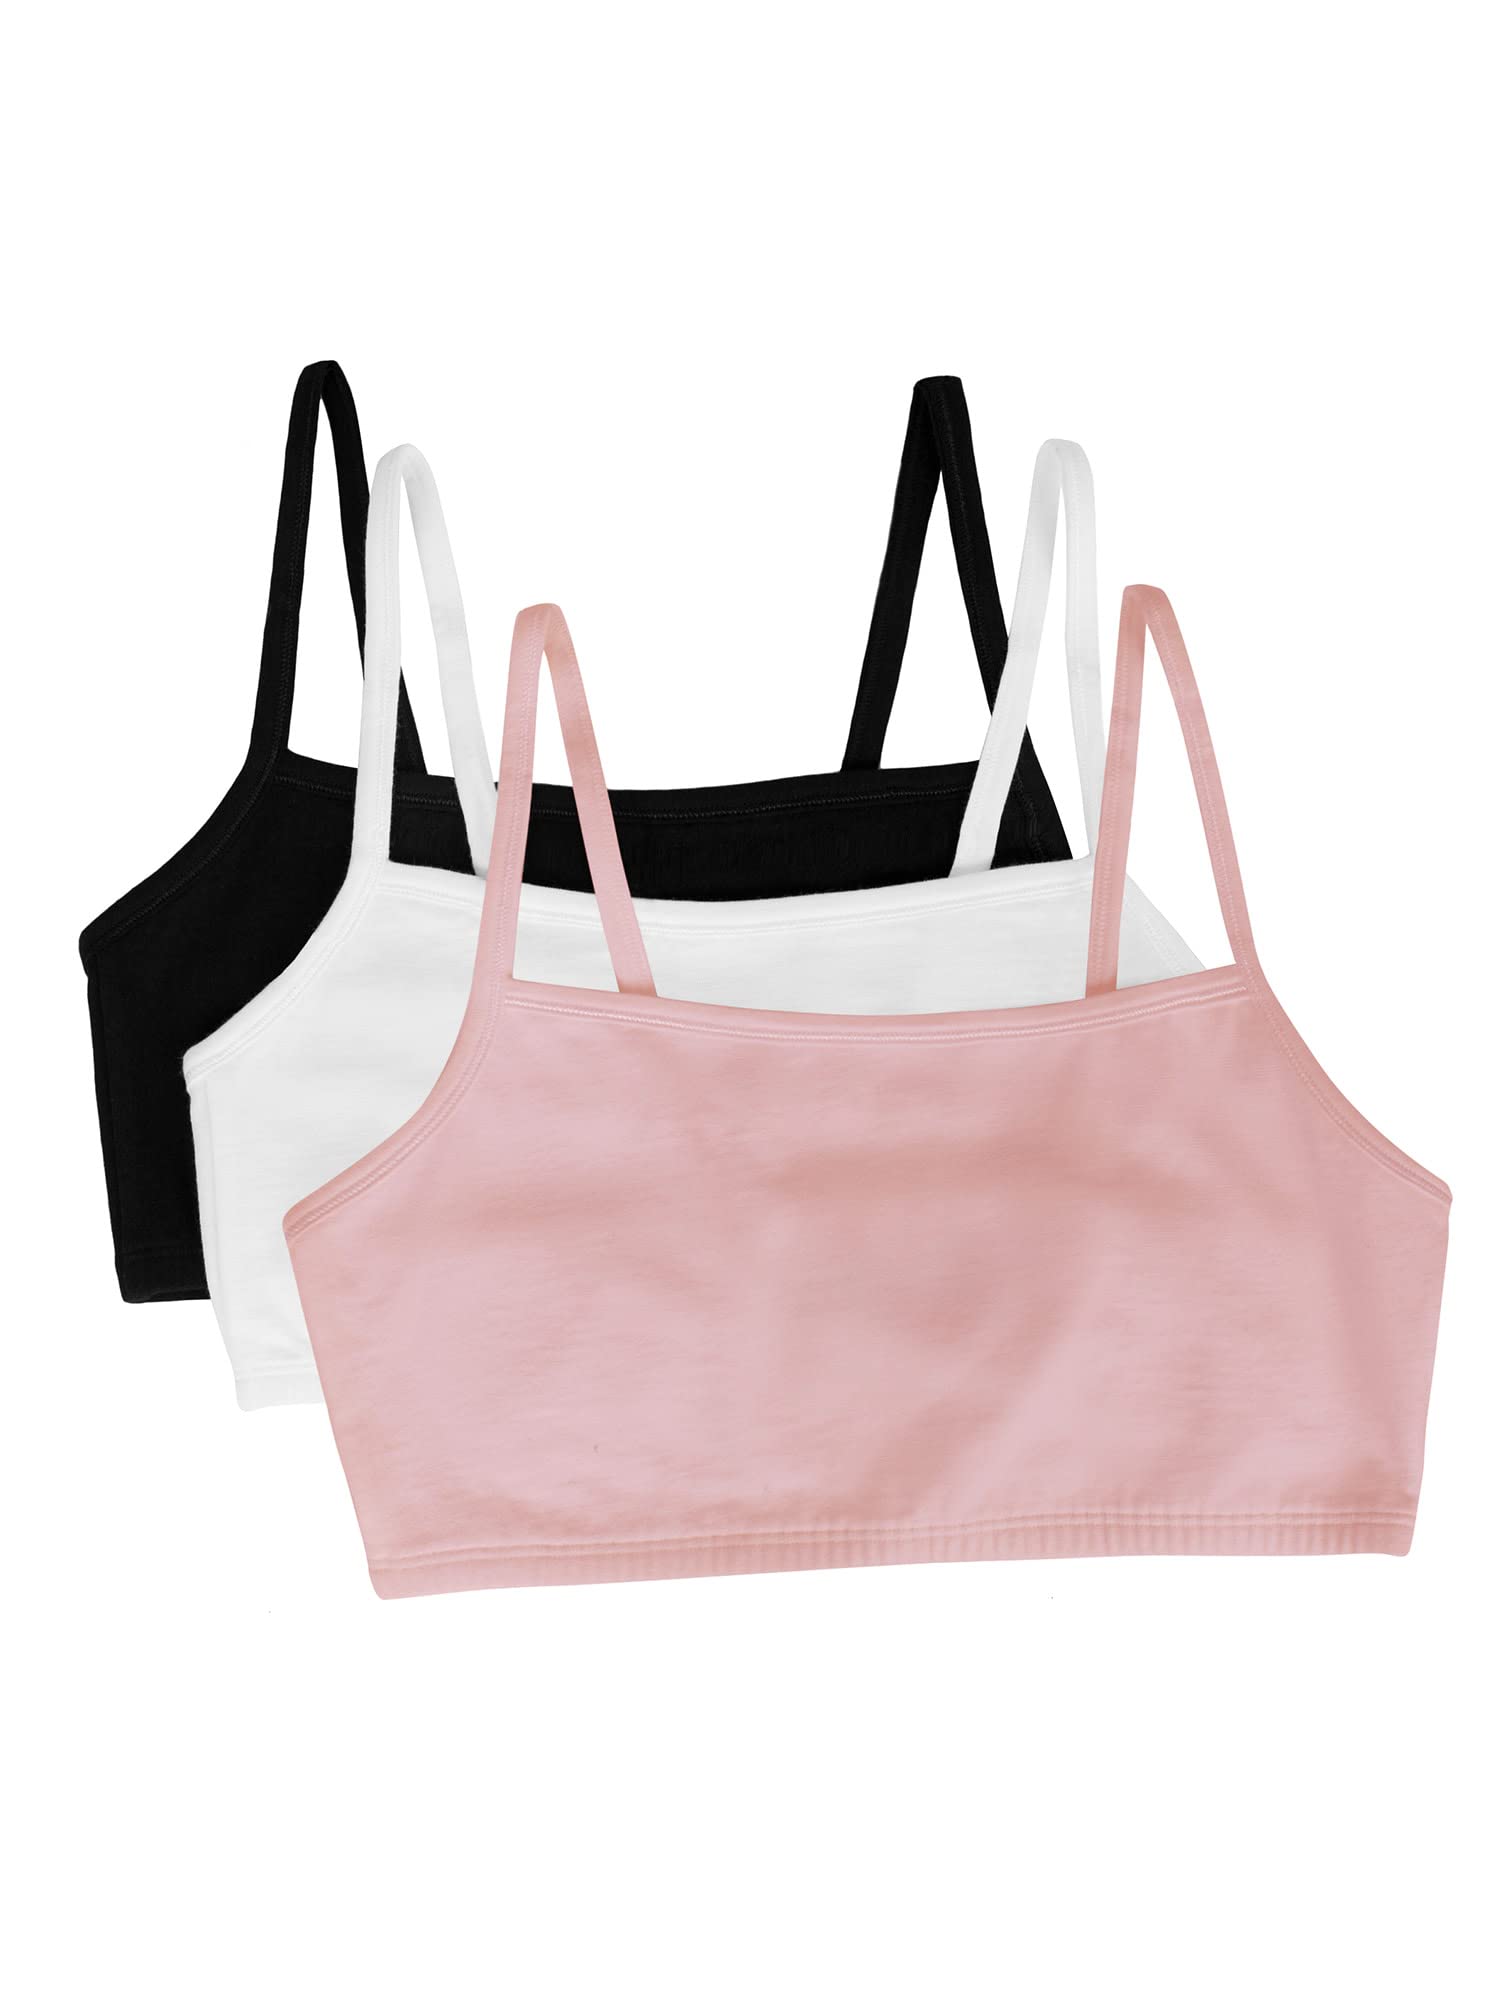 3-Pack Fruit of the Loom Women's Spaghetti Strap Cotton Sports Bra (Size 42) $6.18 + Free Shipping w/ Prime or on $35+